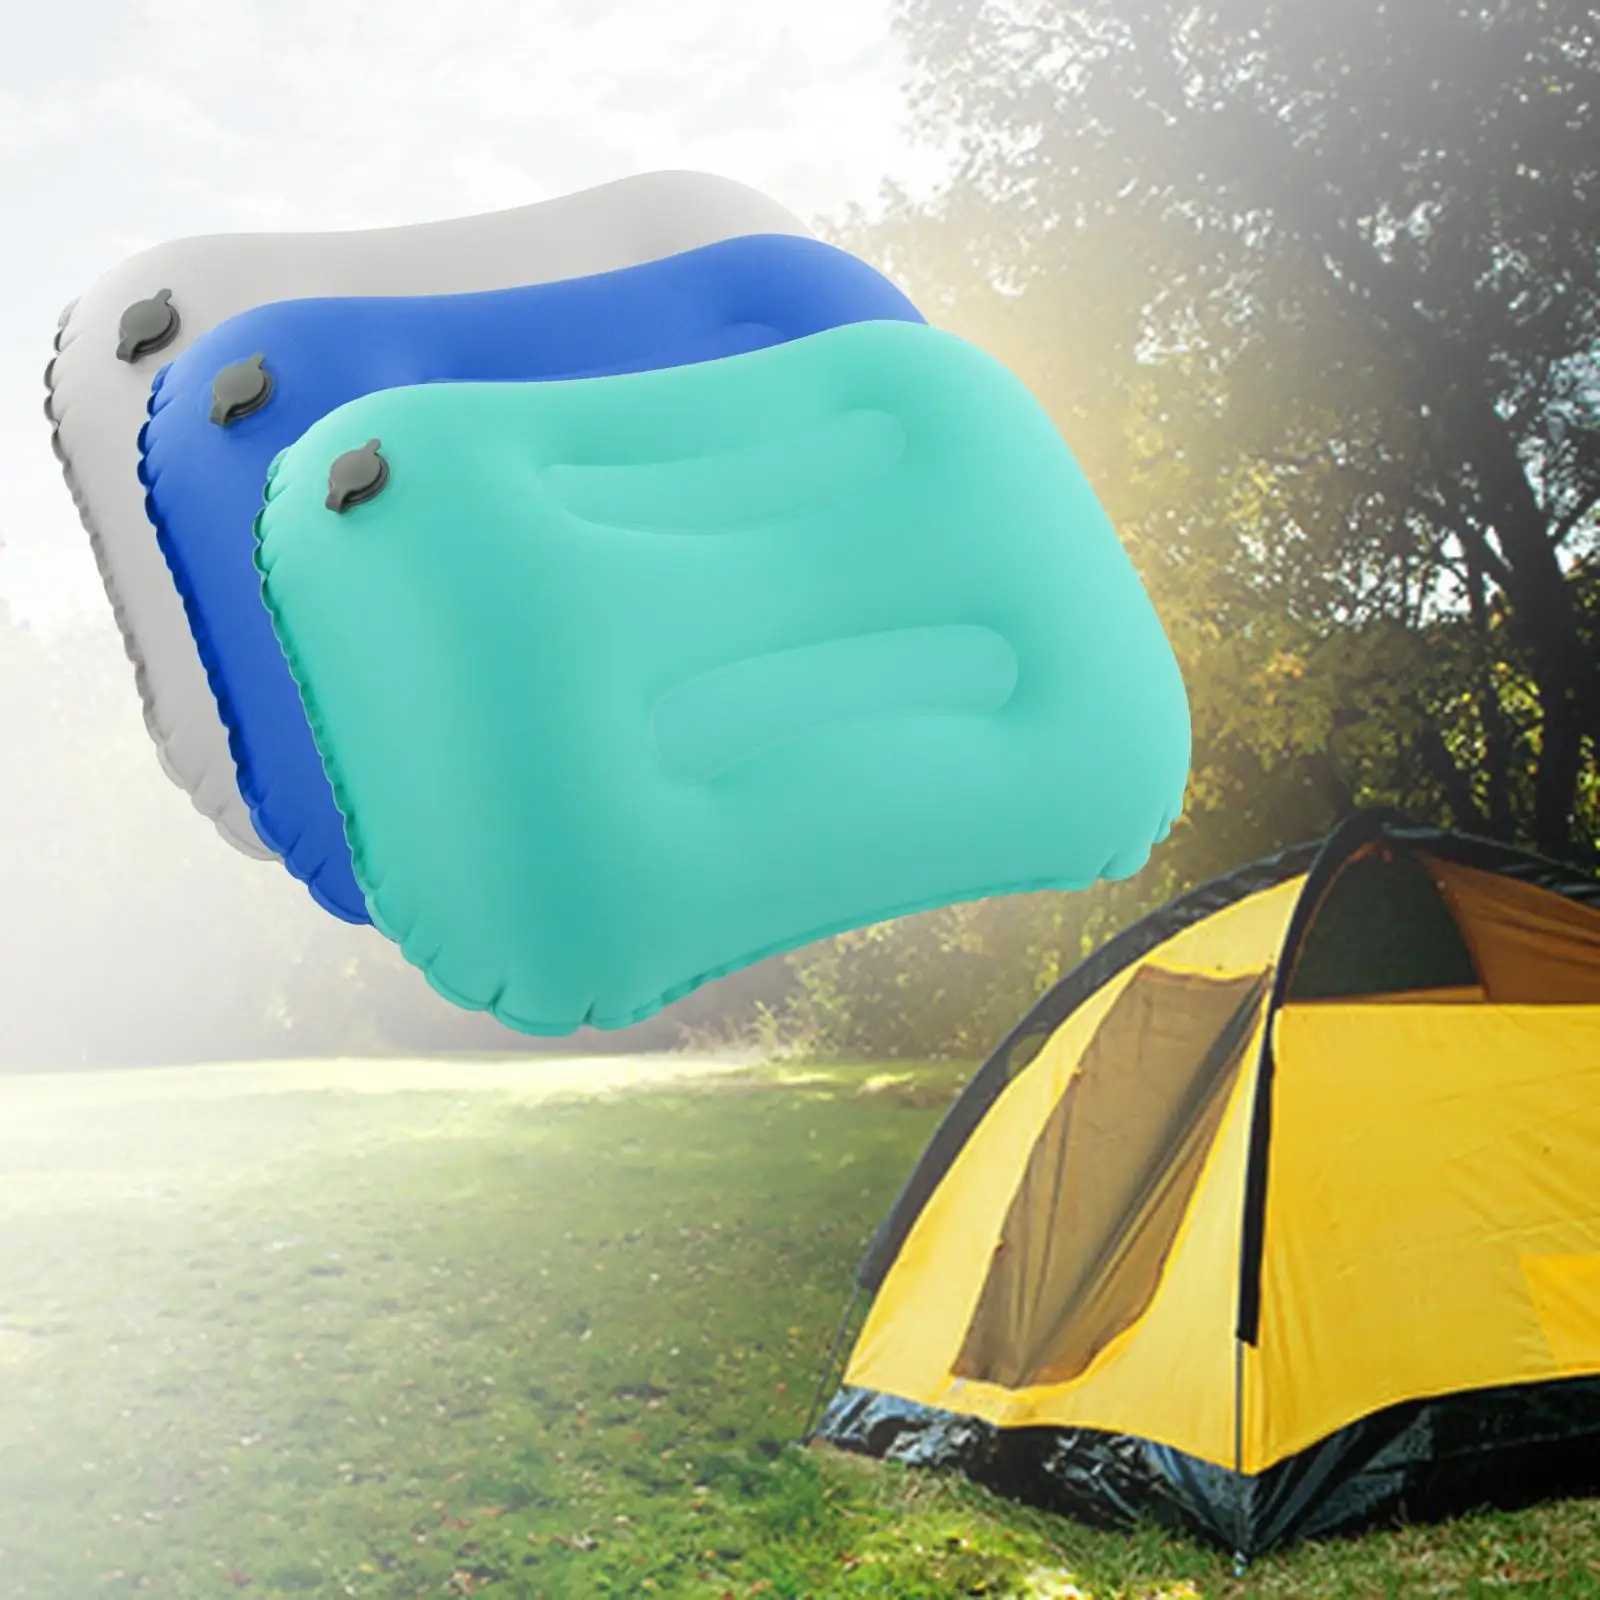 Inflatable Camping Pillow Compact Comfortable Ergonomic Pillows Cushion for Travel Fishing Picnic Hiking Office